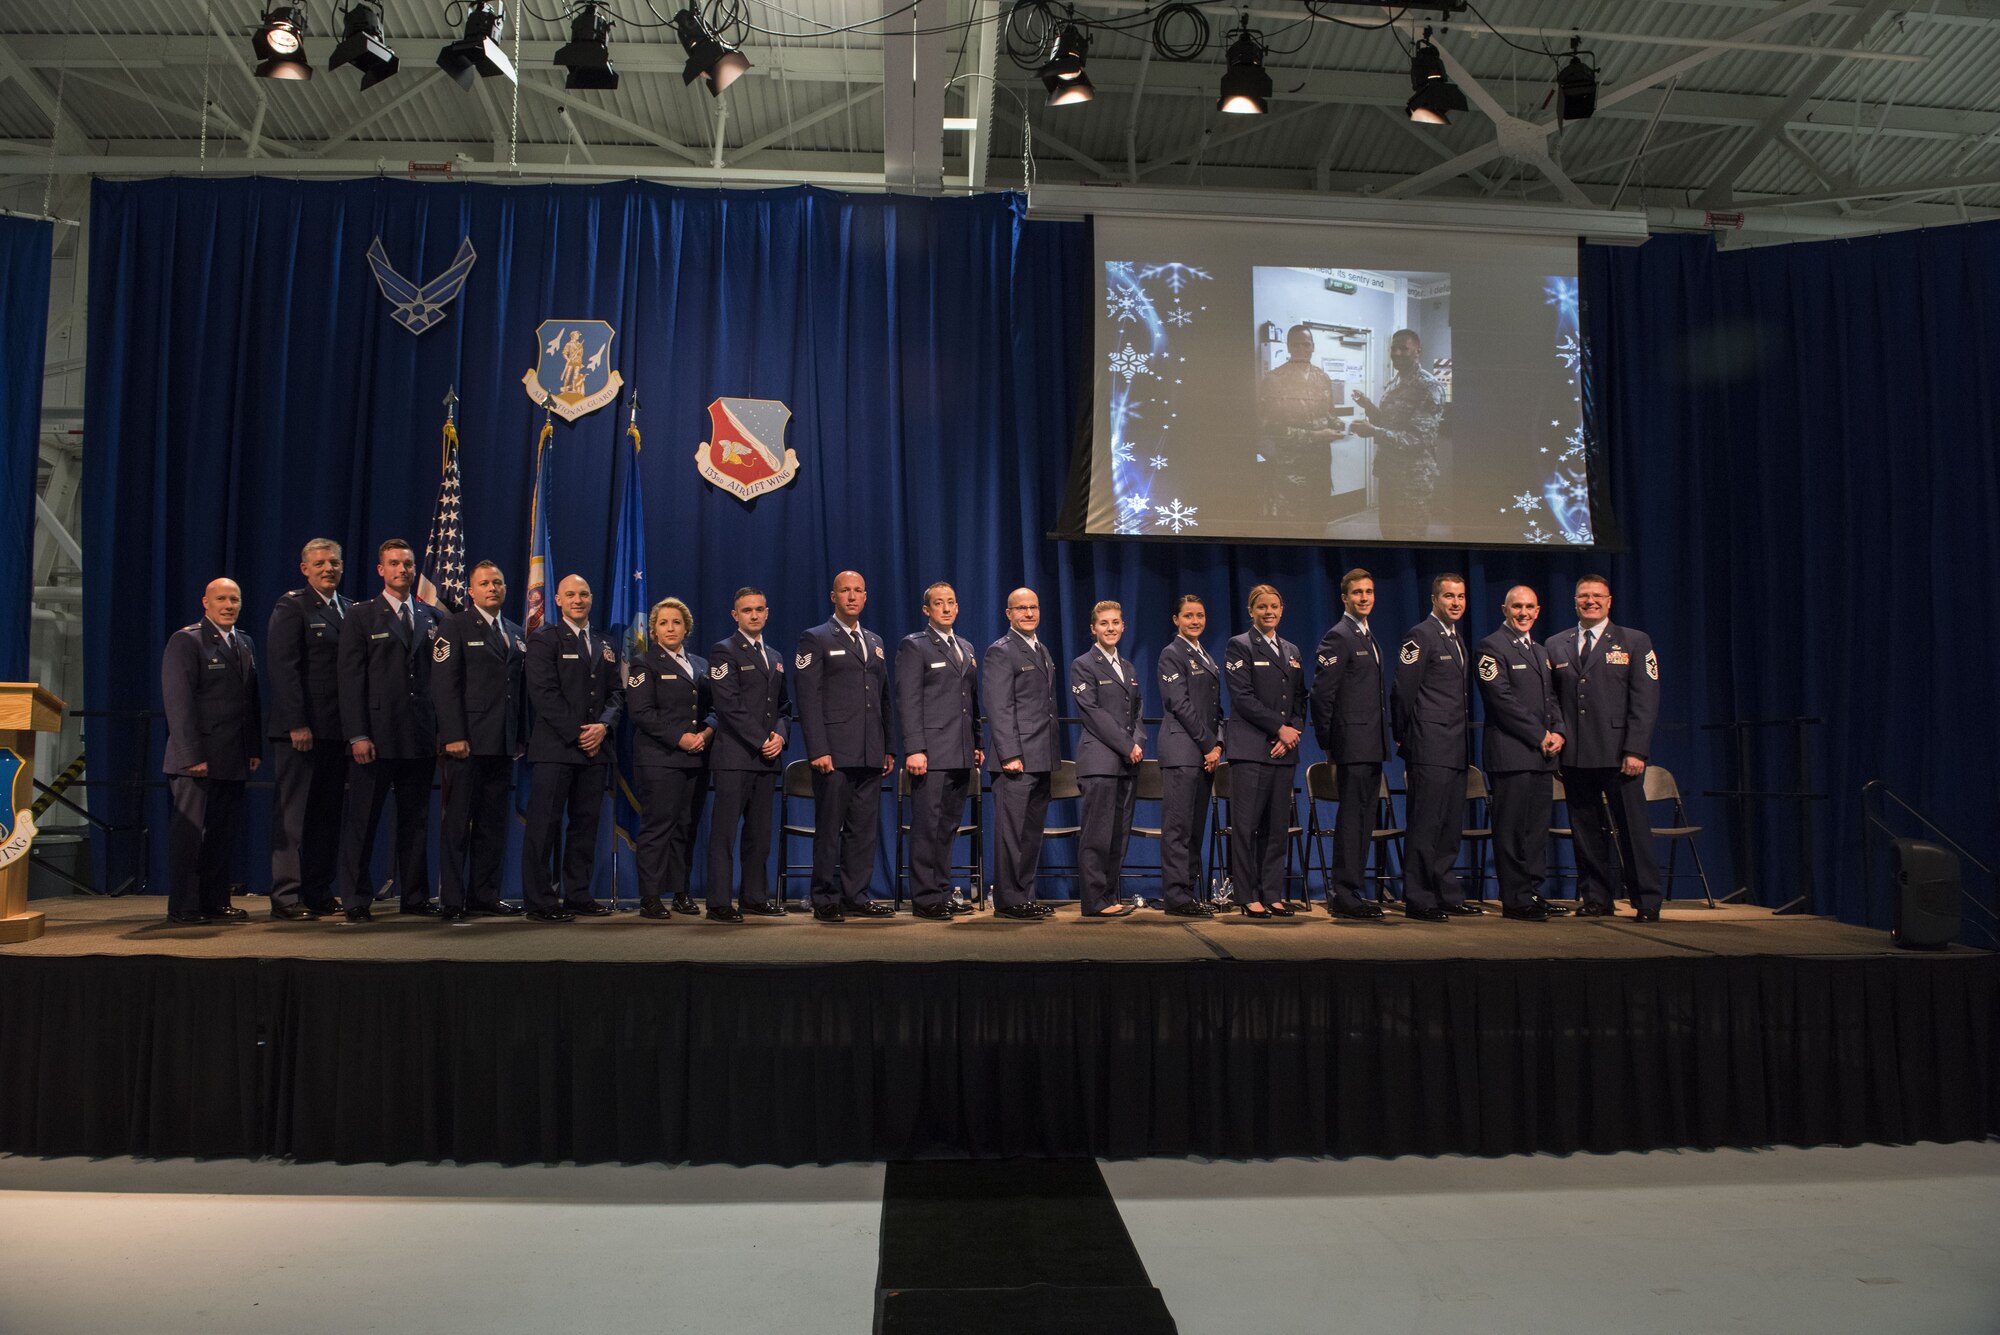 U.S. Air Force Airmen from the 133rd Airlift Wing, along with distinguished guests, former commanders, retirees, and family members attend the annual Wing Award Ceremony in St. Paul, Minn., Dec. 9, 2017.